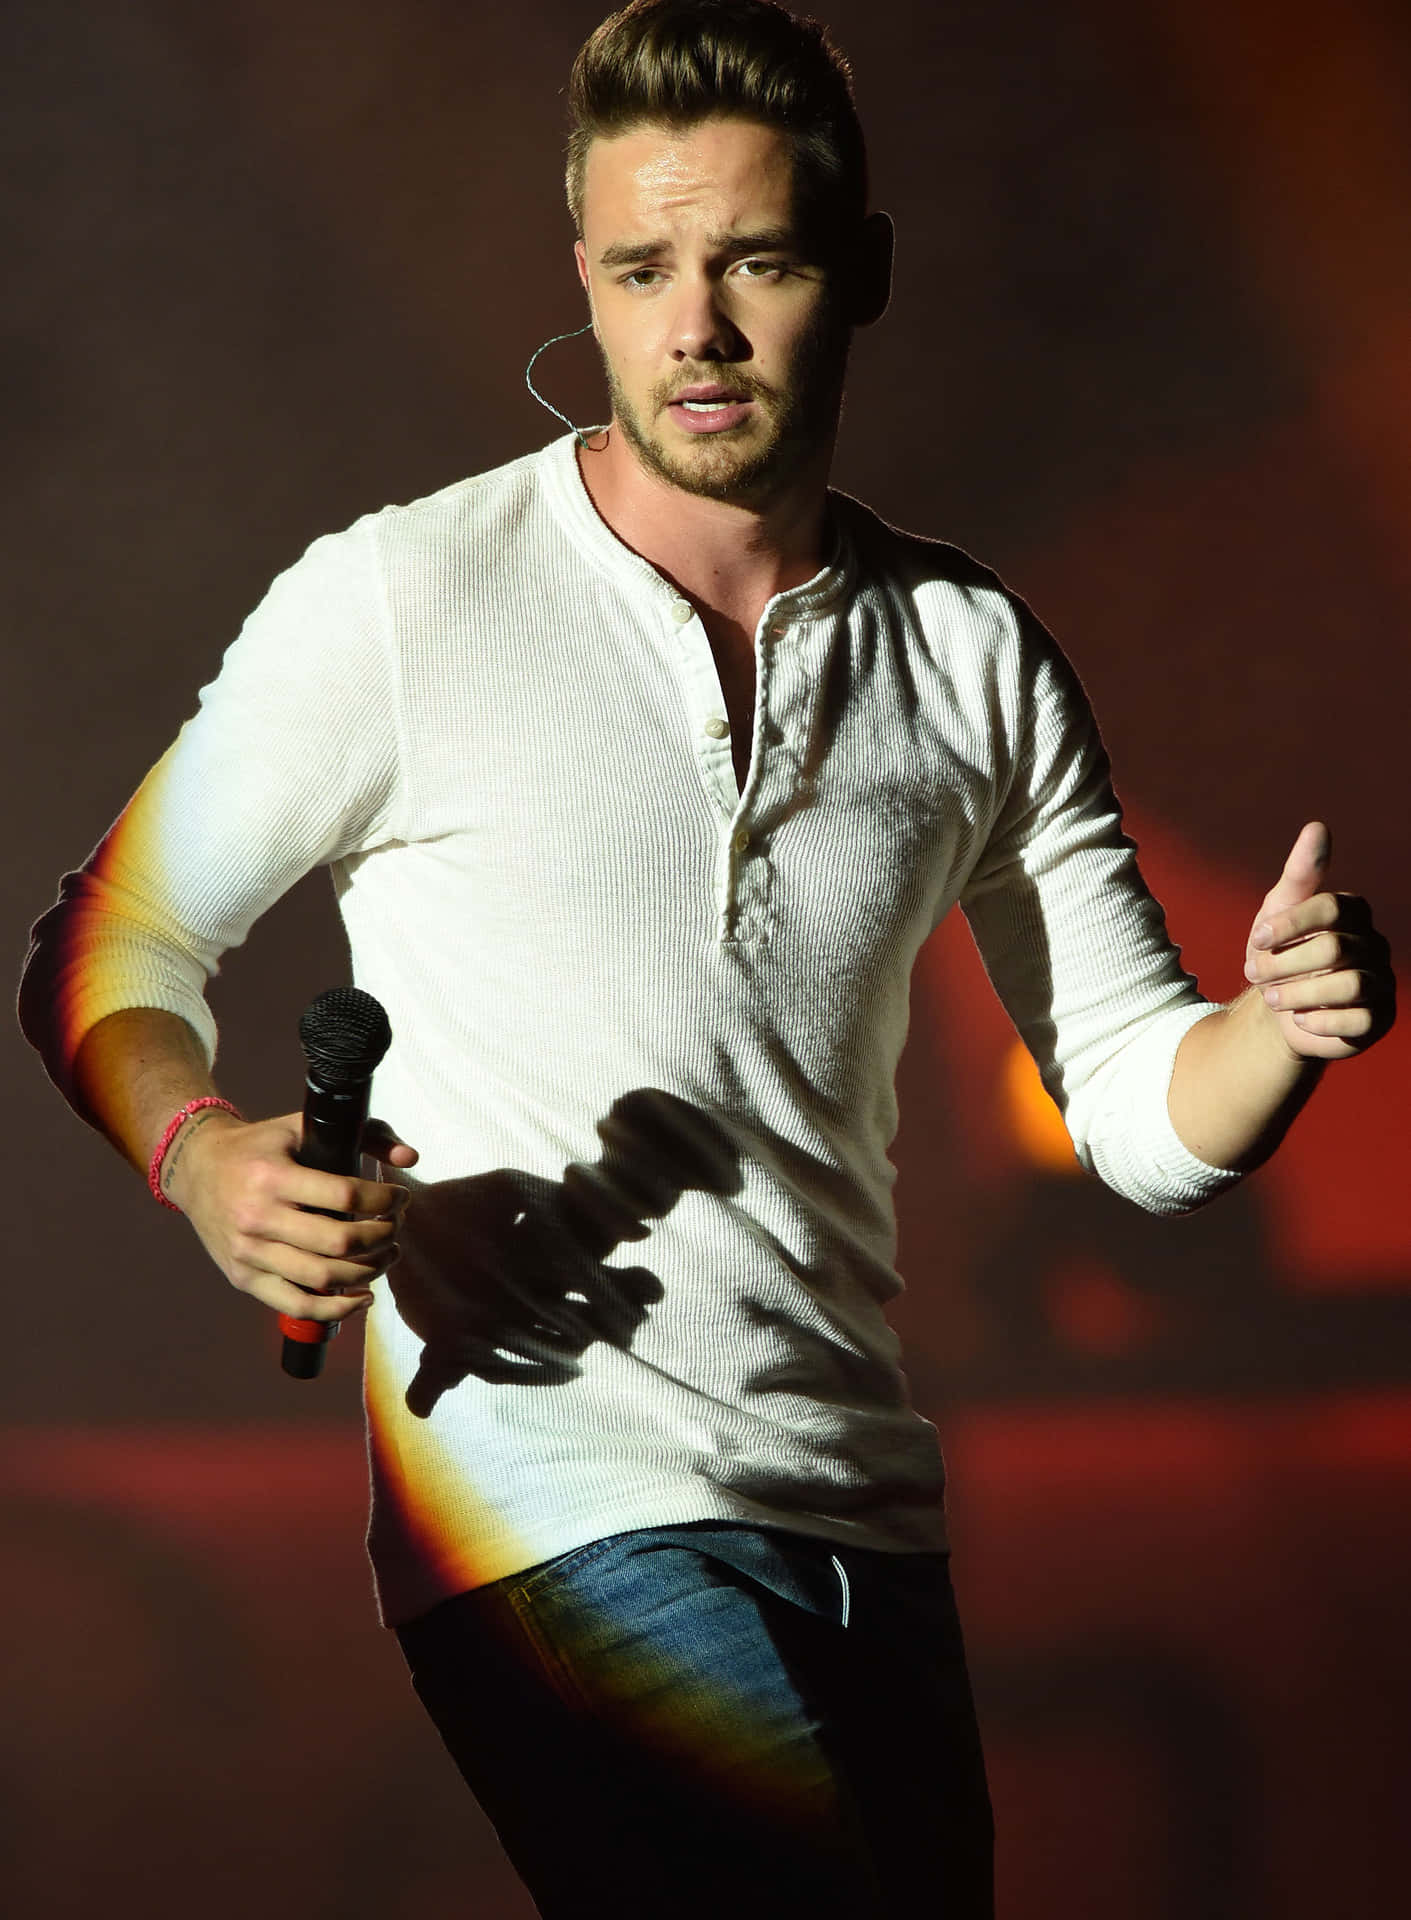 Liam Payne Performing At London's O2 Arena Background